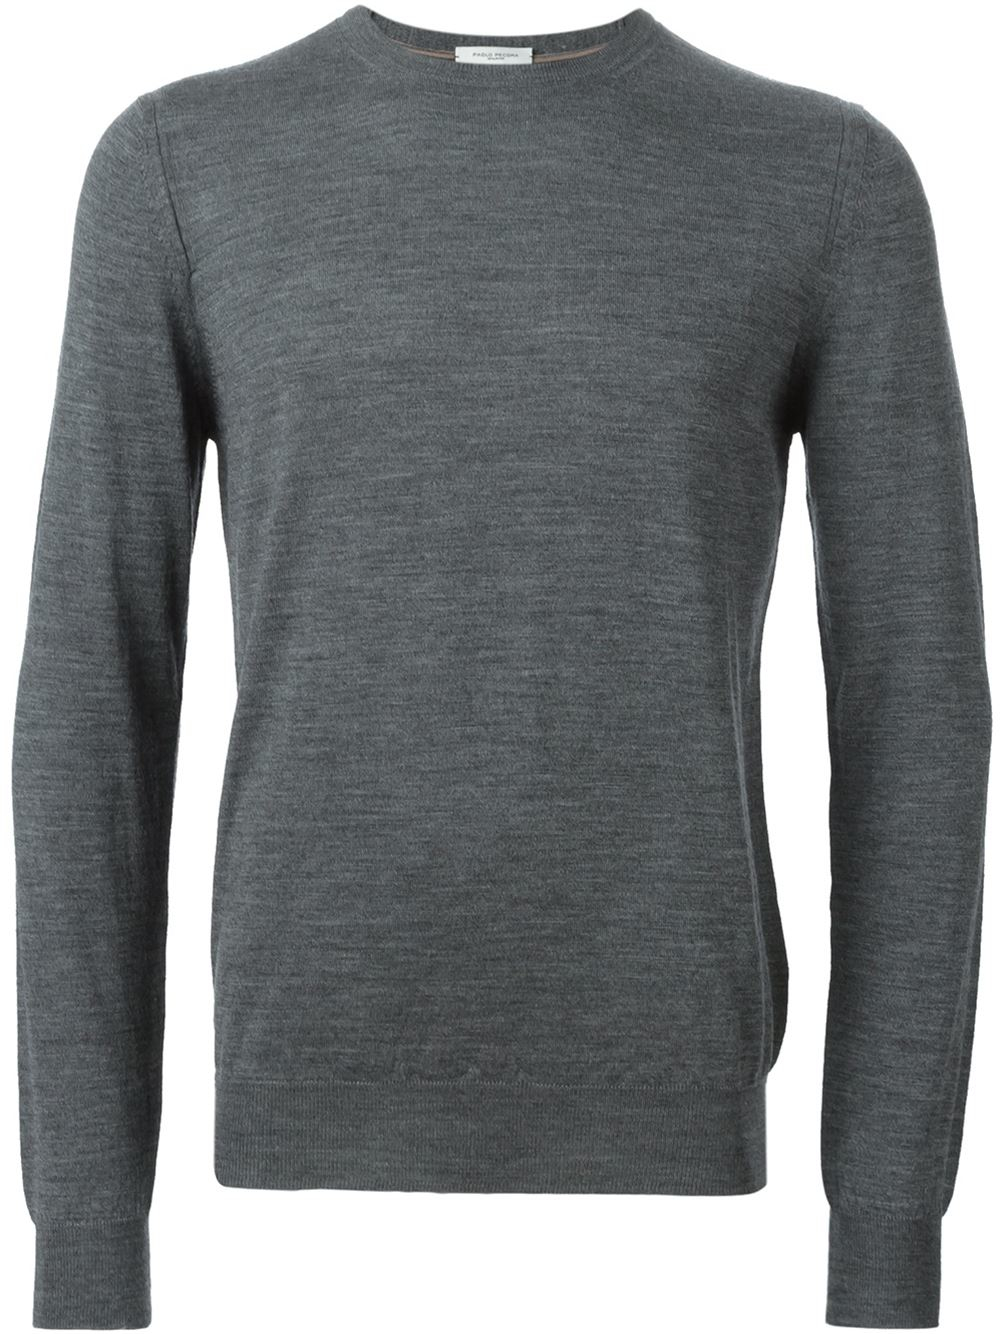 Paolo Pecora Crew Neck Sweater in Gray for Men (GREY) | Lyst